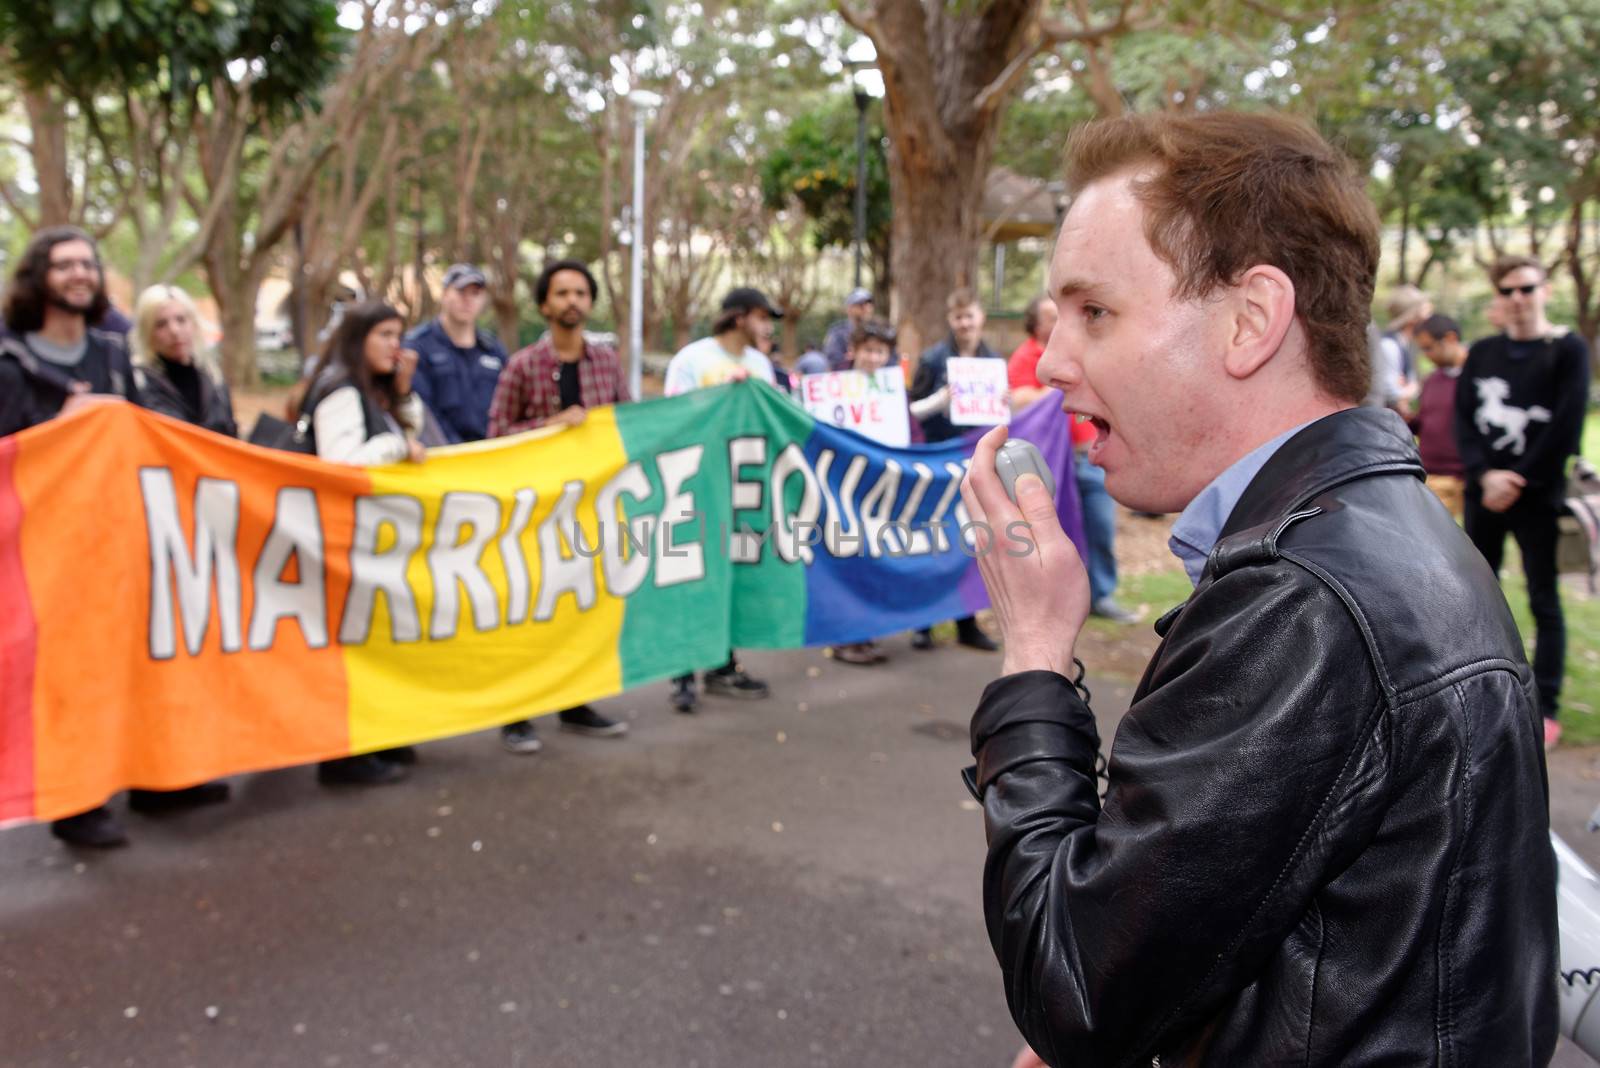 AUSTRALIA, Sydney: Amid ongoing discussion in federal government over marriage equality, New South Wales MP Reverend Fred Nile leads a Unity Australia rally from Belmore Park to Martin Place on September 20, 2015 to celebrate marriage and family and to protect traditional marriage